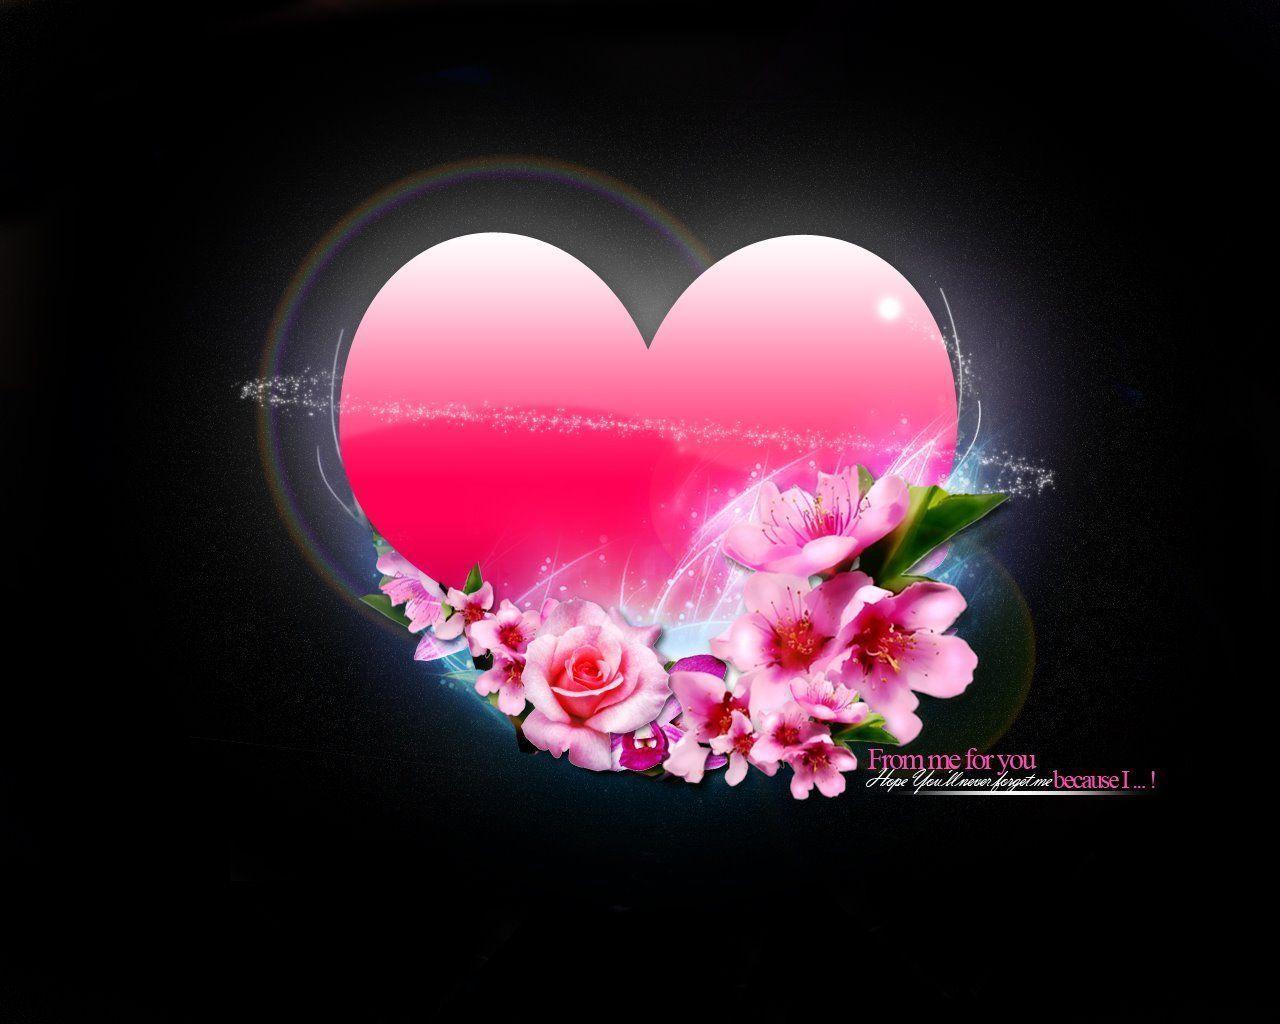 Heart and flowers wallpaper. Heart and flowers